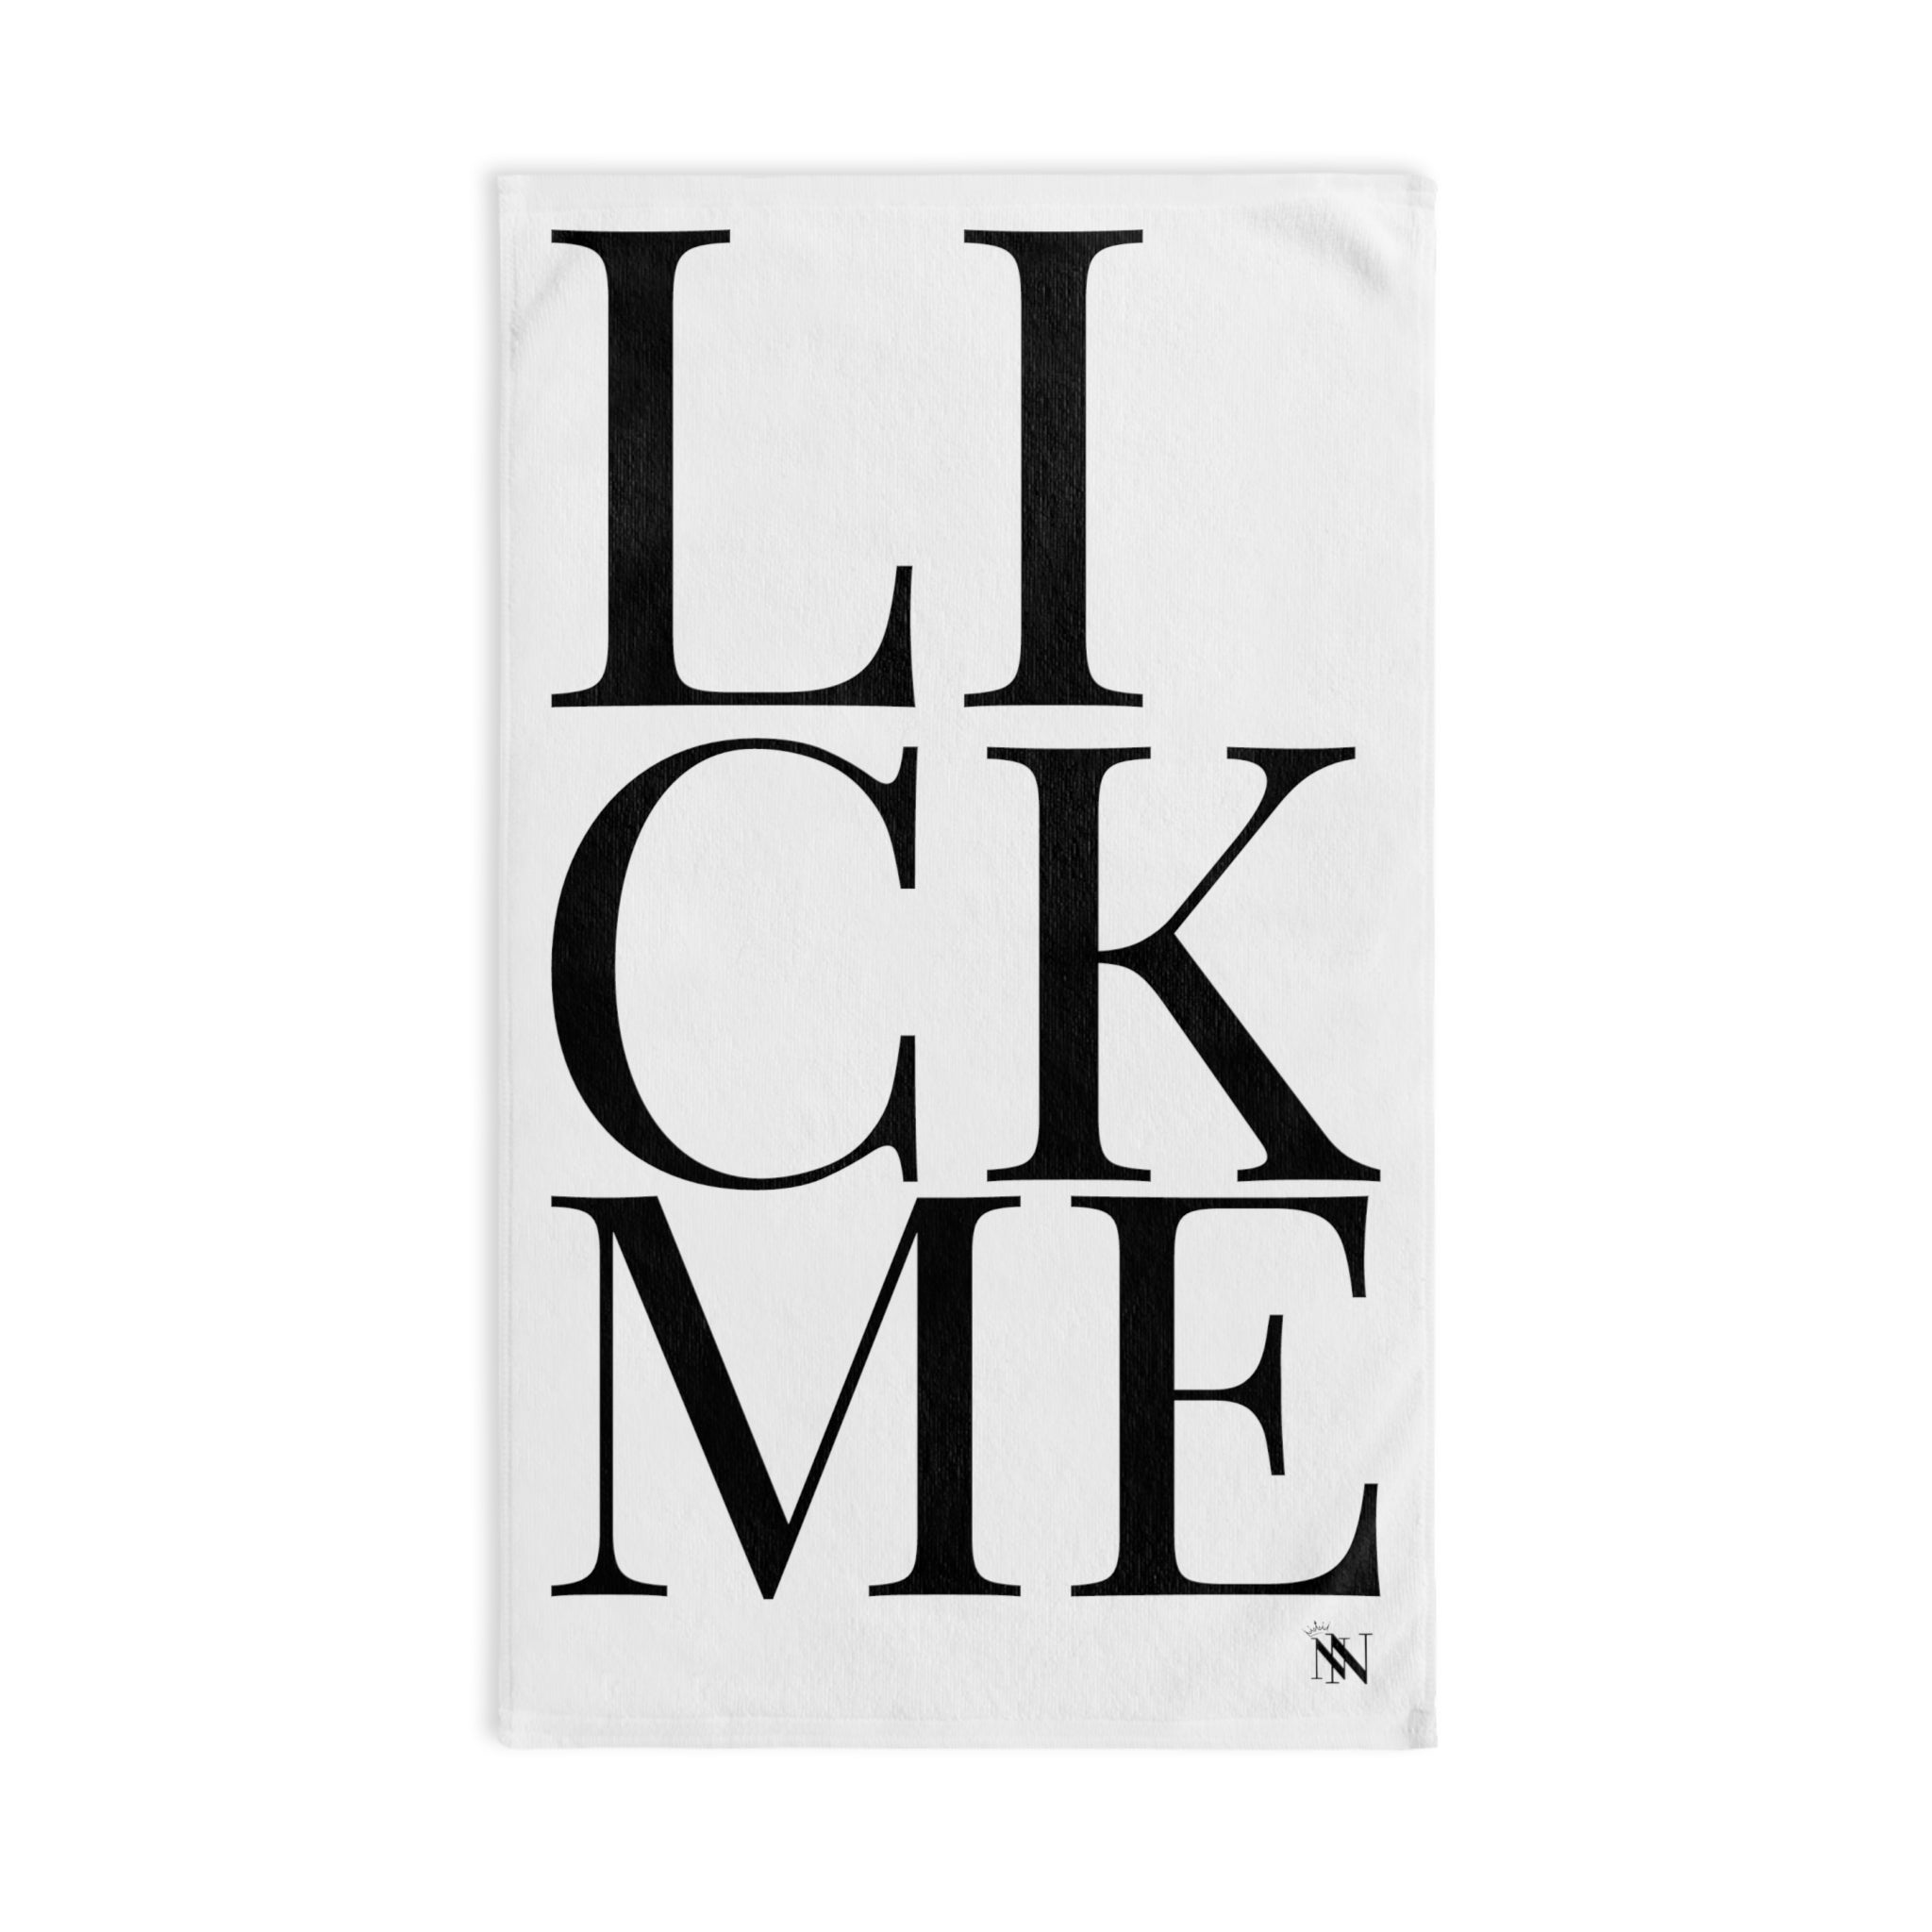 Lick Me Letter White | Funny Gifts for Men - Gifts for Him - Birthday Gifts for Men, Him, Her, Husband, Boyfriend, Girlfriend, New Couple Gifts, Fathers & Valentines Day Gifts, Christmas Gifts NECTAR NAPKINS